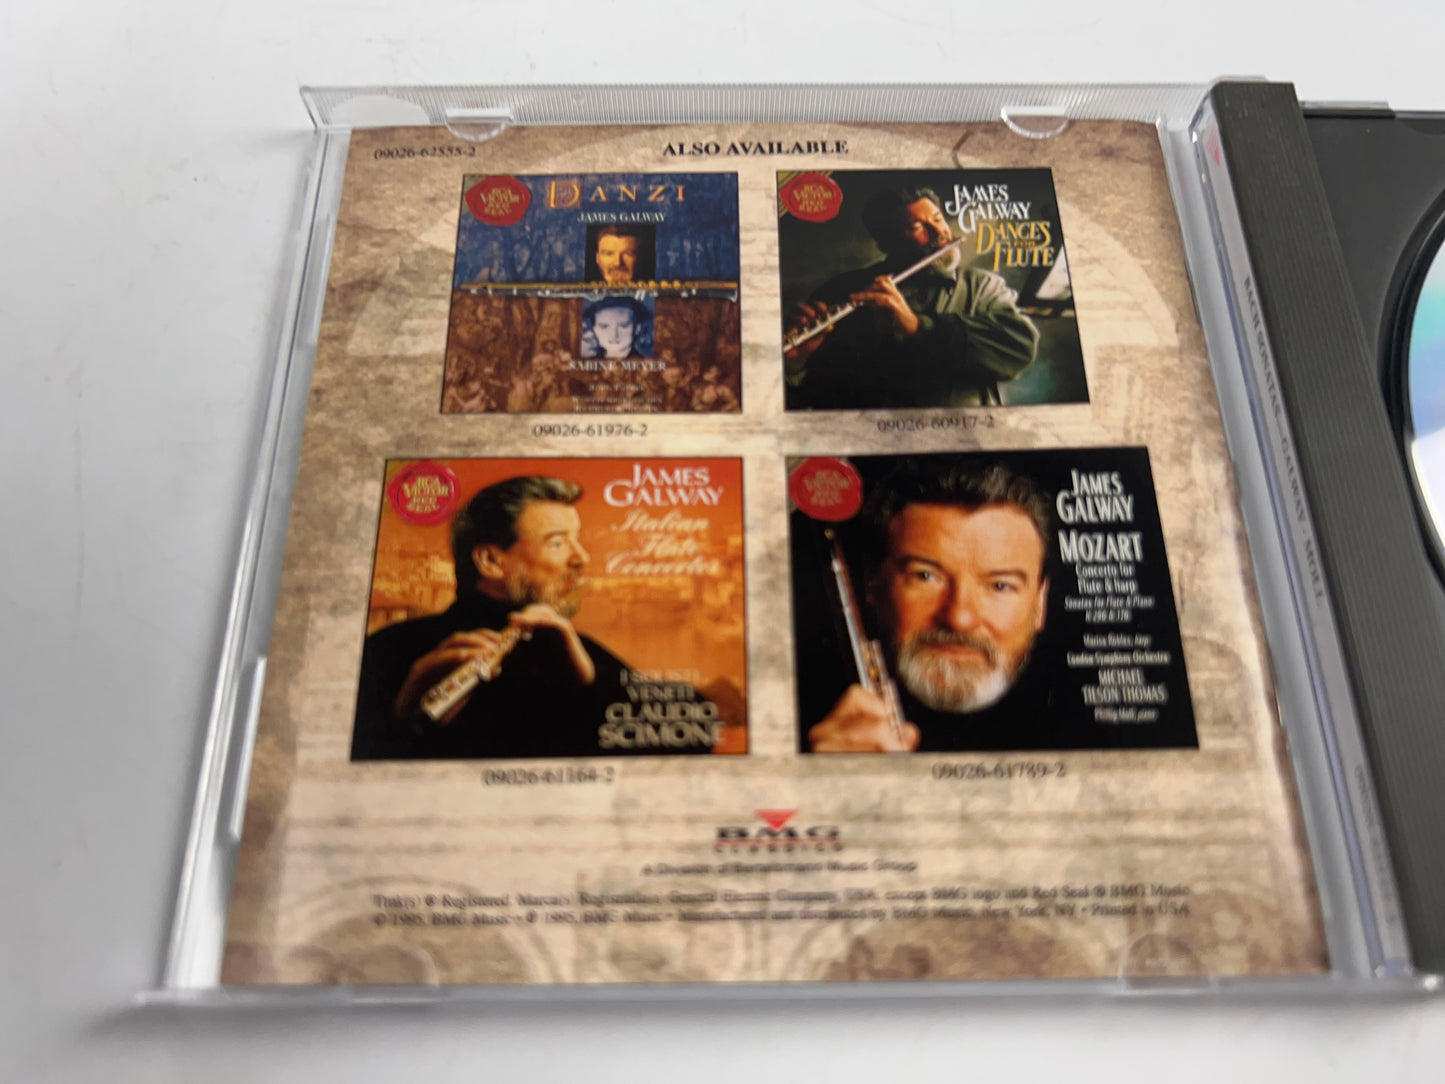 Bach Sonatas by James Galway, Phillip Moll, and Sarah Cunningham (CD, 1995)